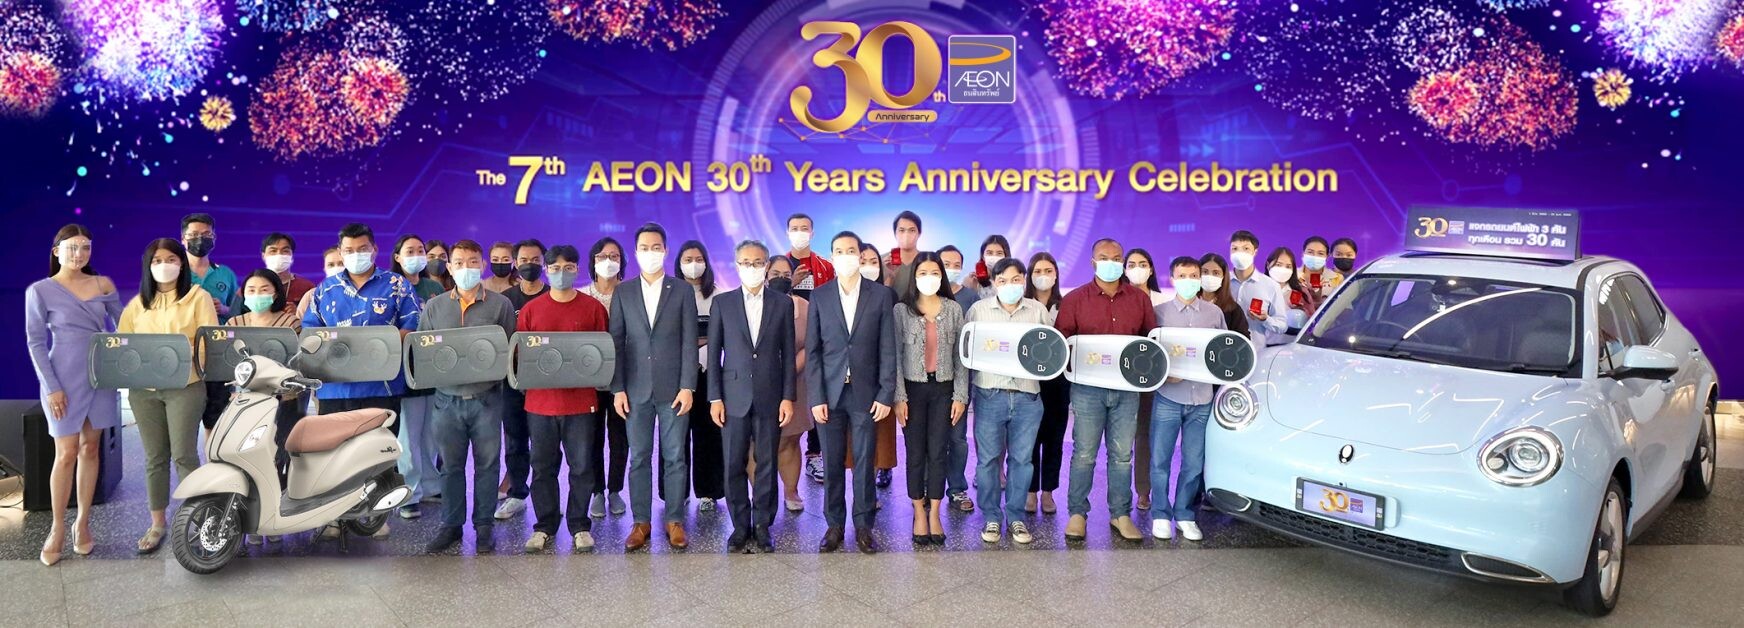 AEON grants exclusive prizes for 7th time  for the 30th Anniversary Celebration campaign